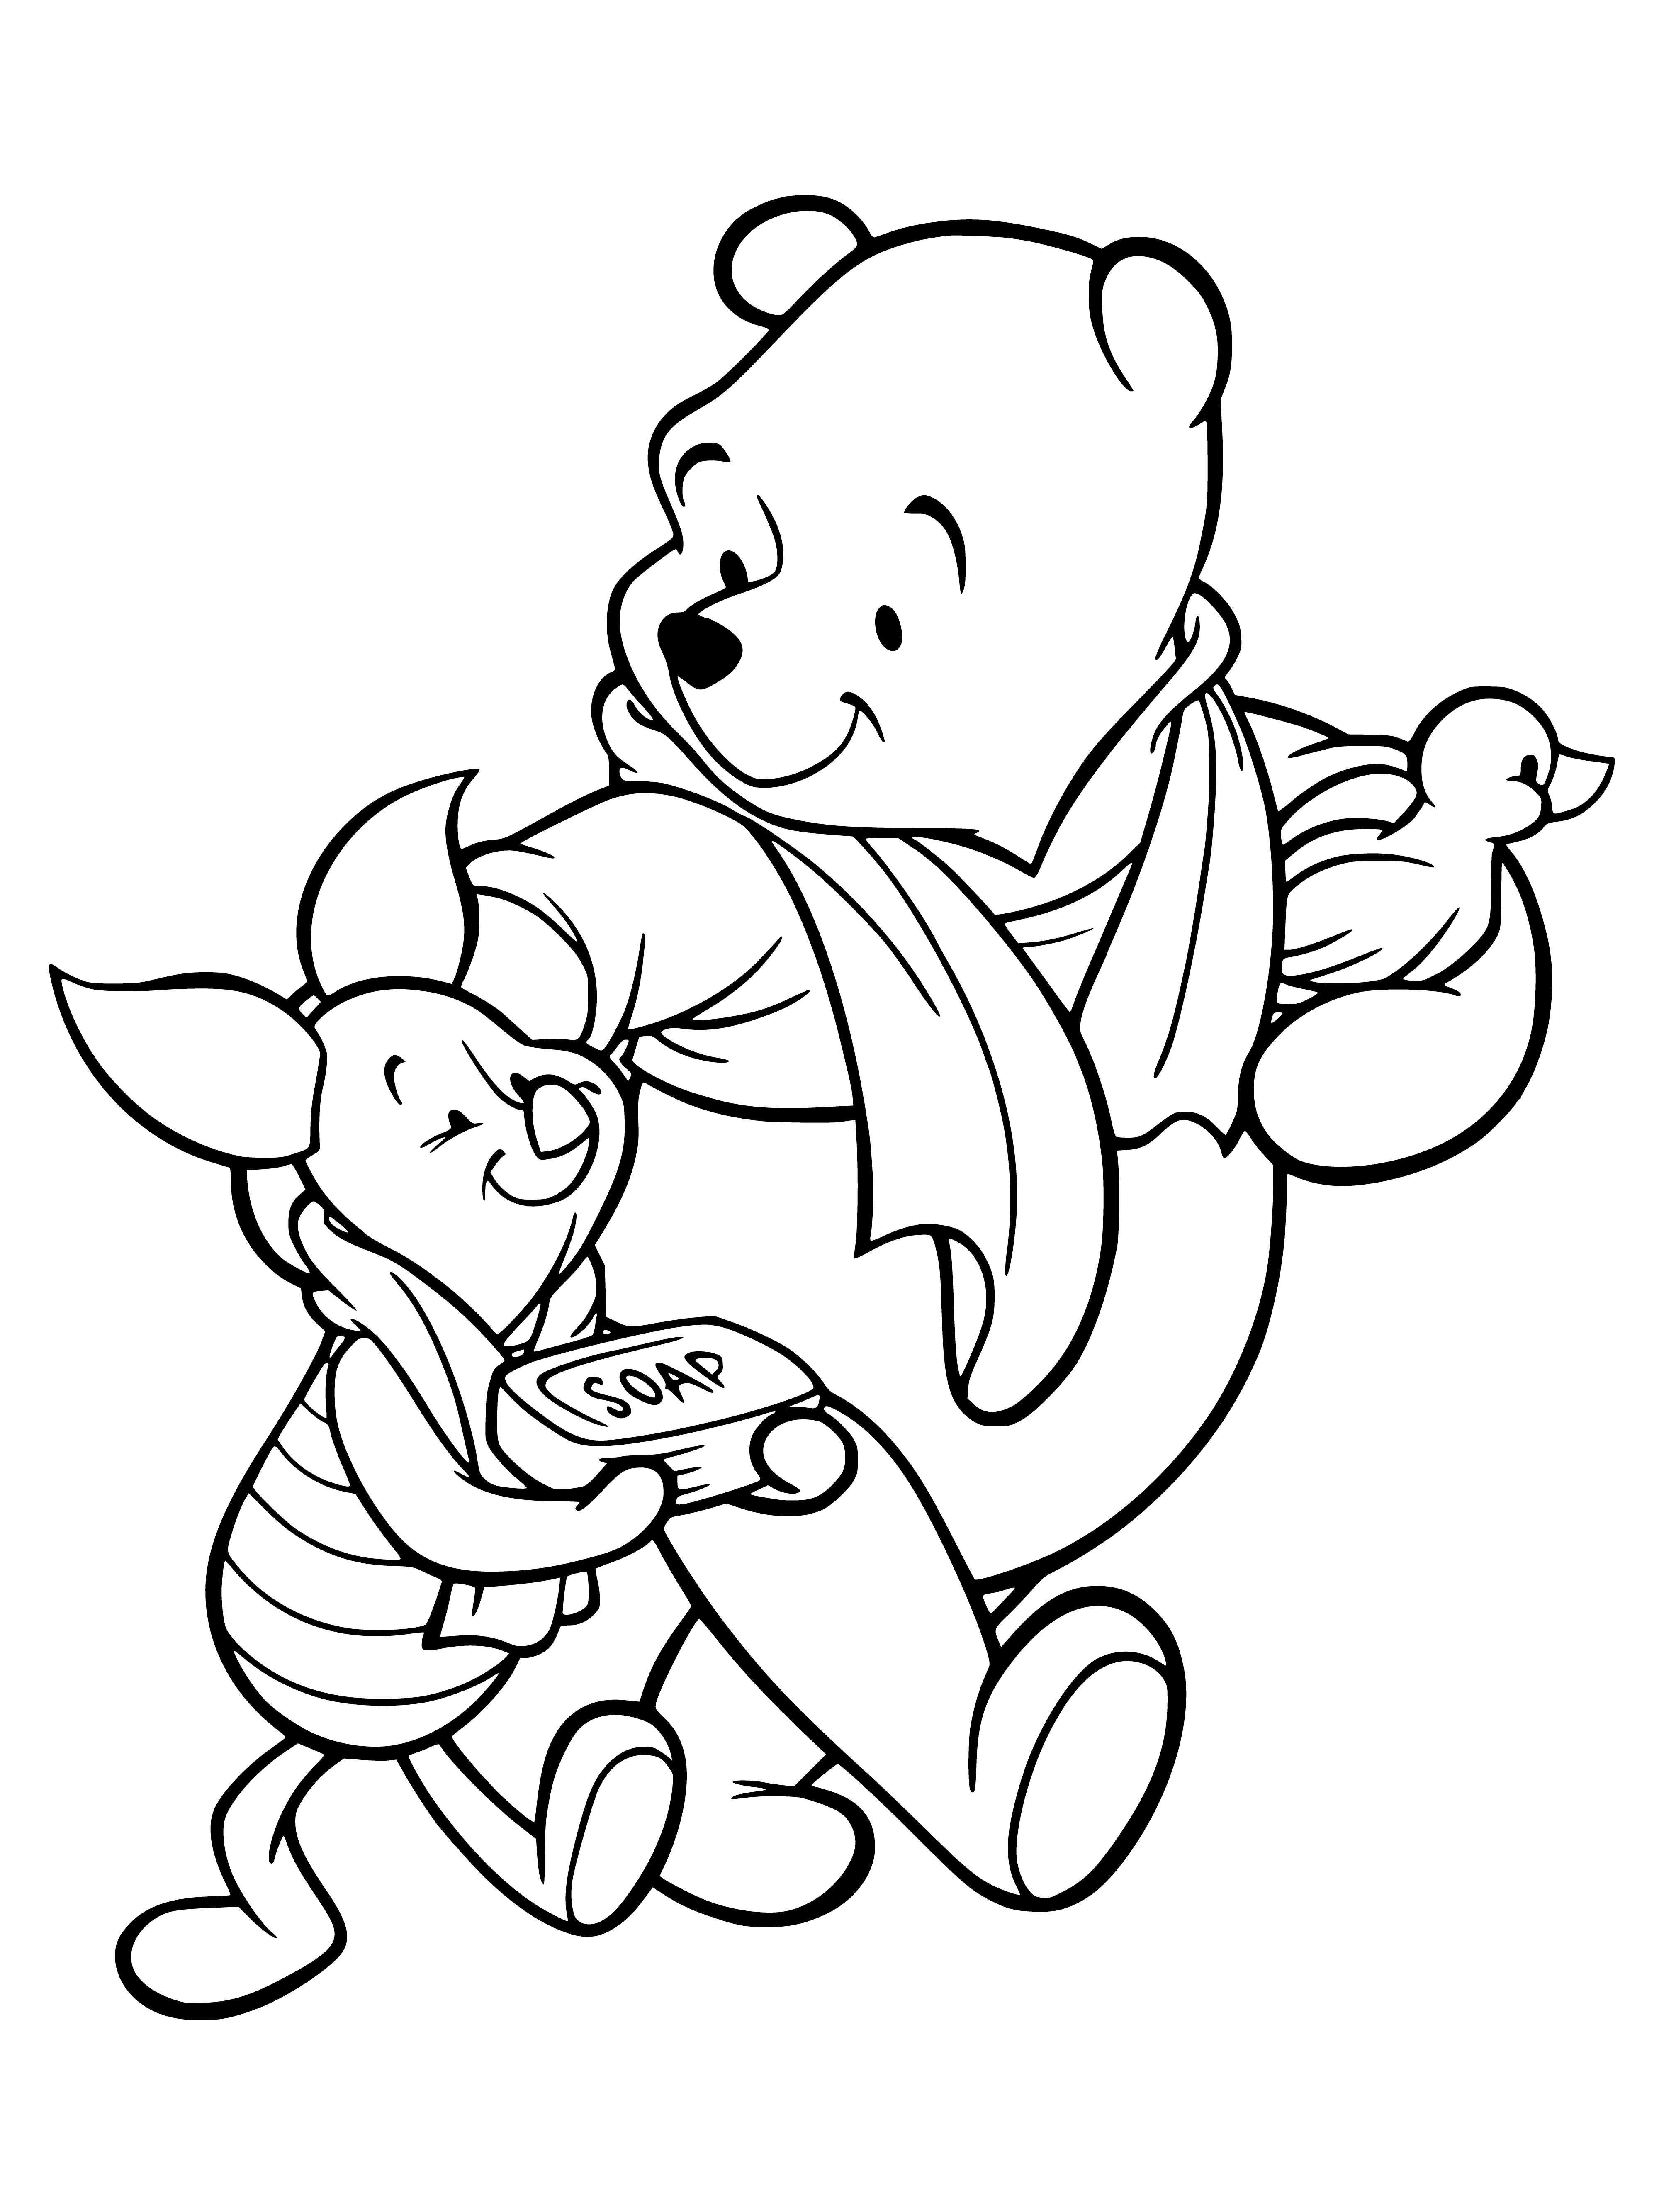 coloring page: Three bears in a tub - 1 has soap, 1 has a towel, 3rd is surrounded by bubbles.